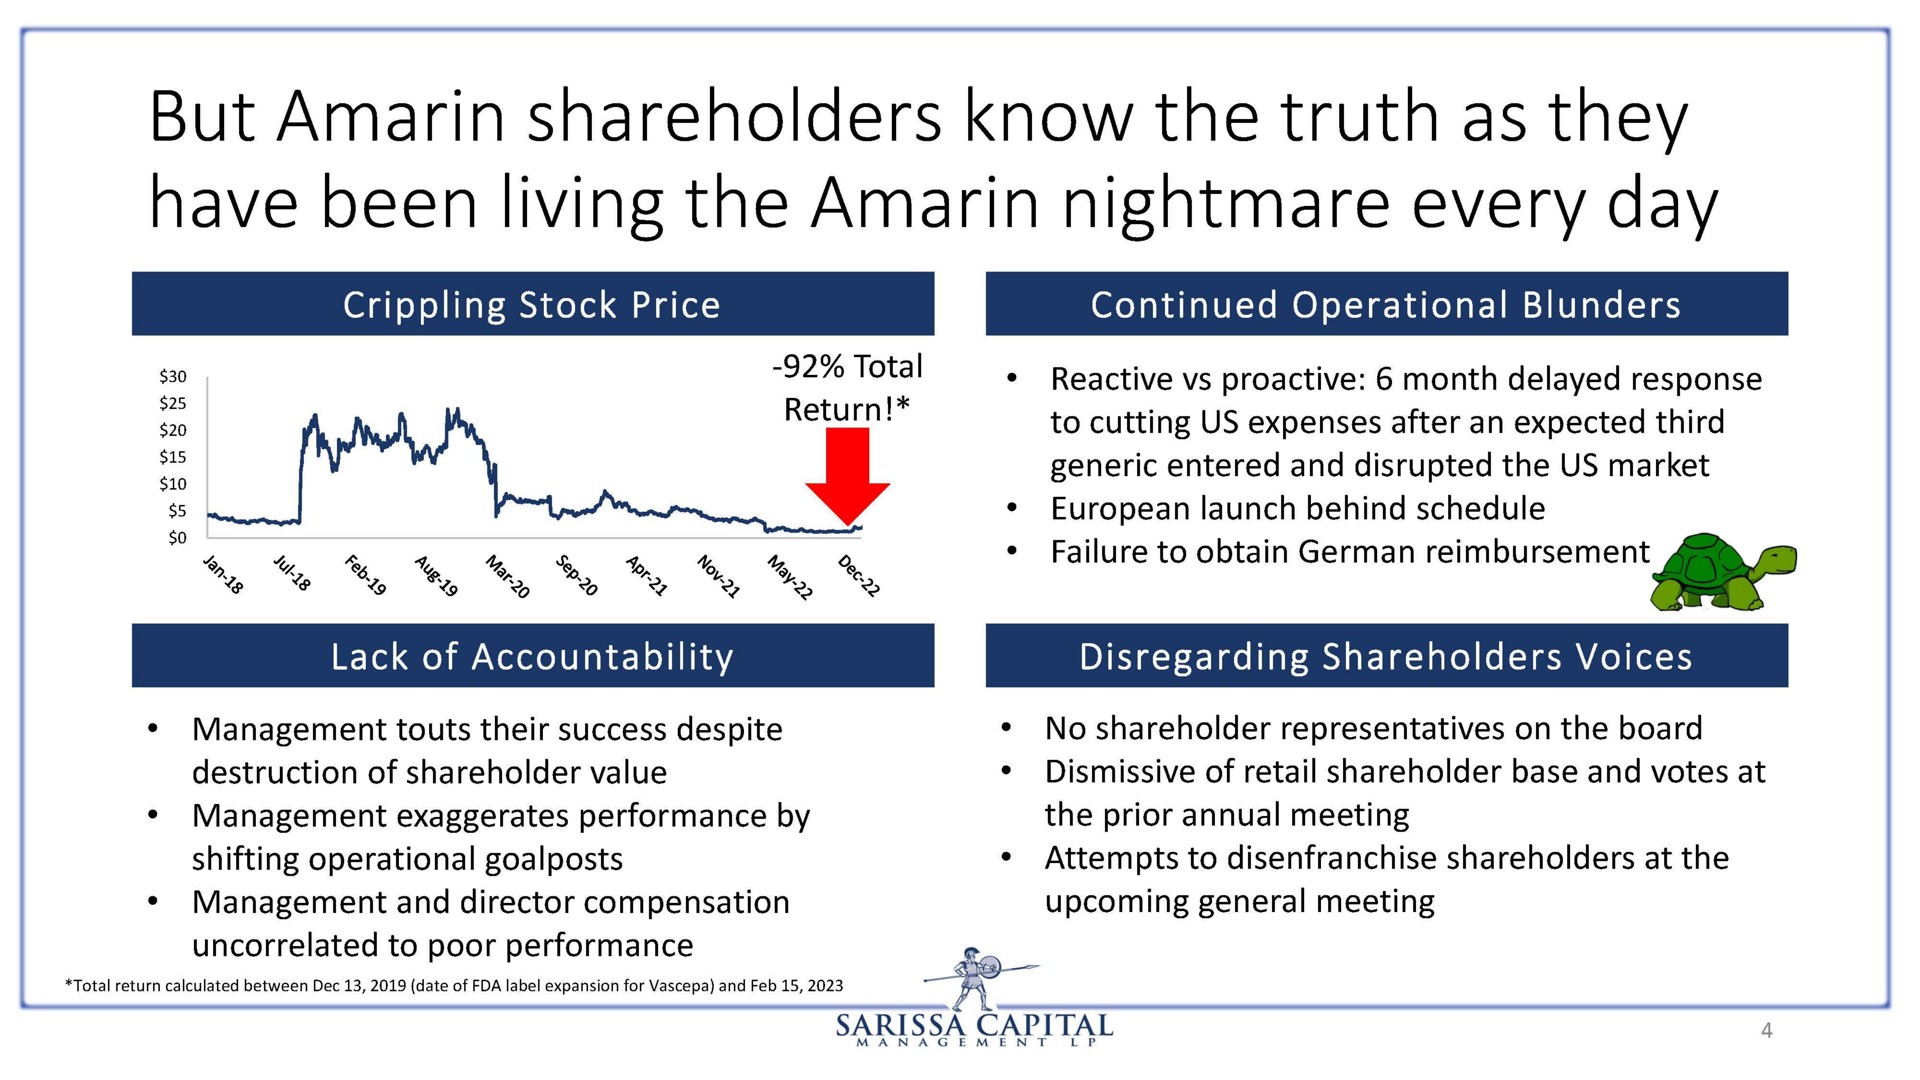 but amarin shareholders know the truth as they have been living the amarin nightmare every day | Sarissa Capital